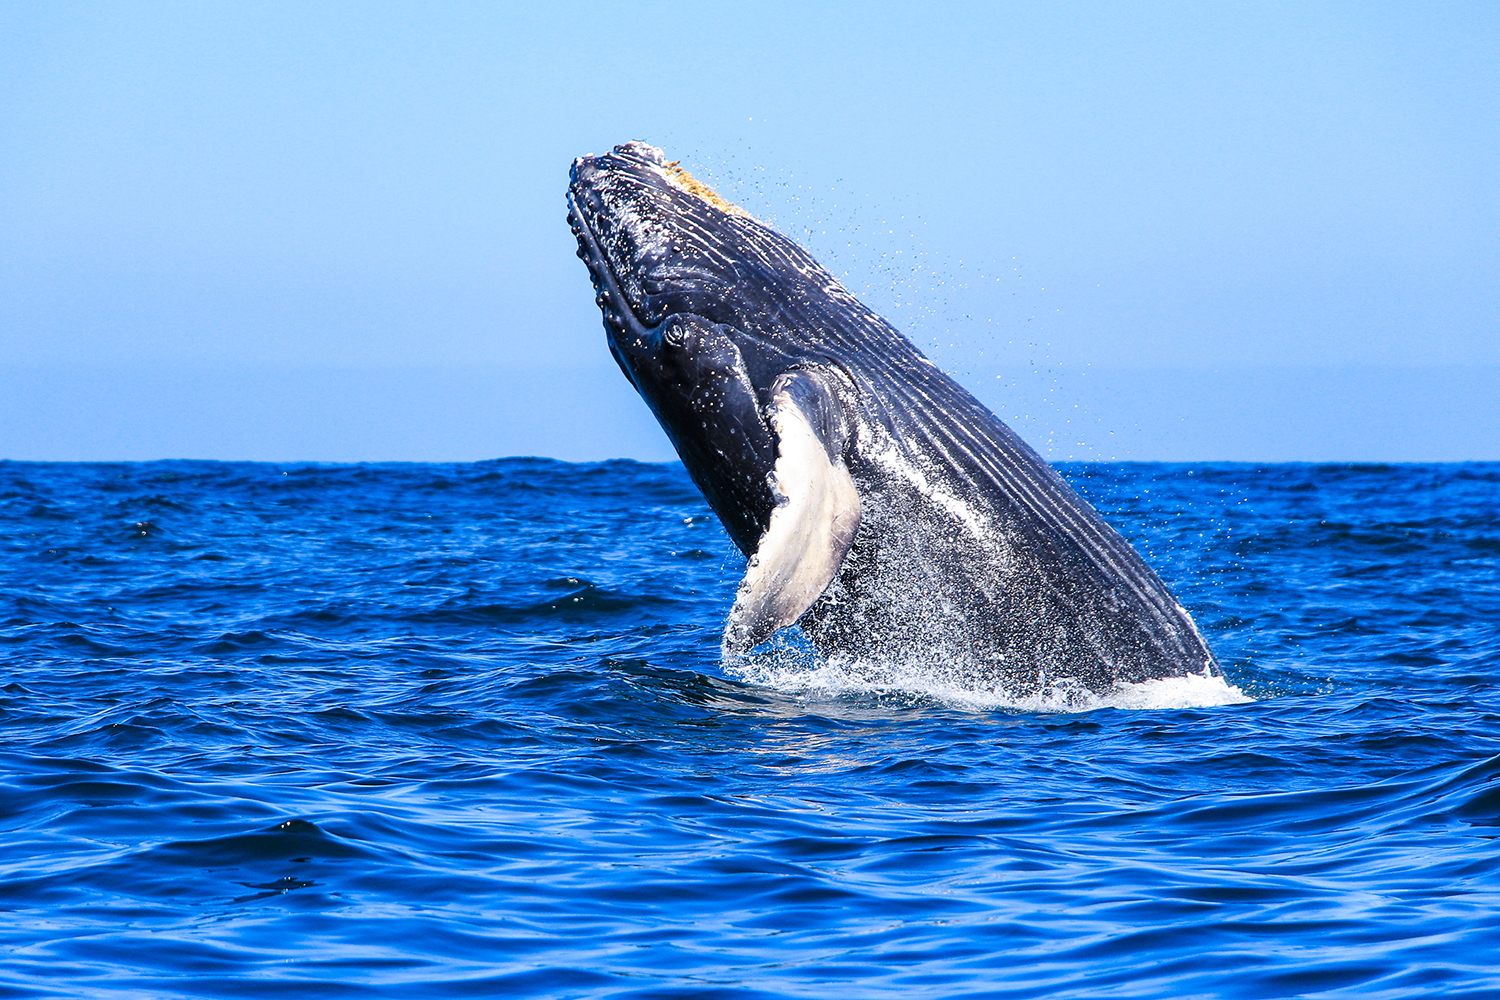 Enter the natural beauty of Puerto Vallarta through whale and dolphin watching tours.